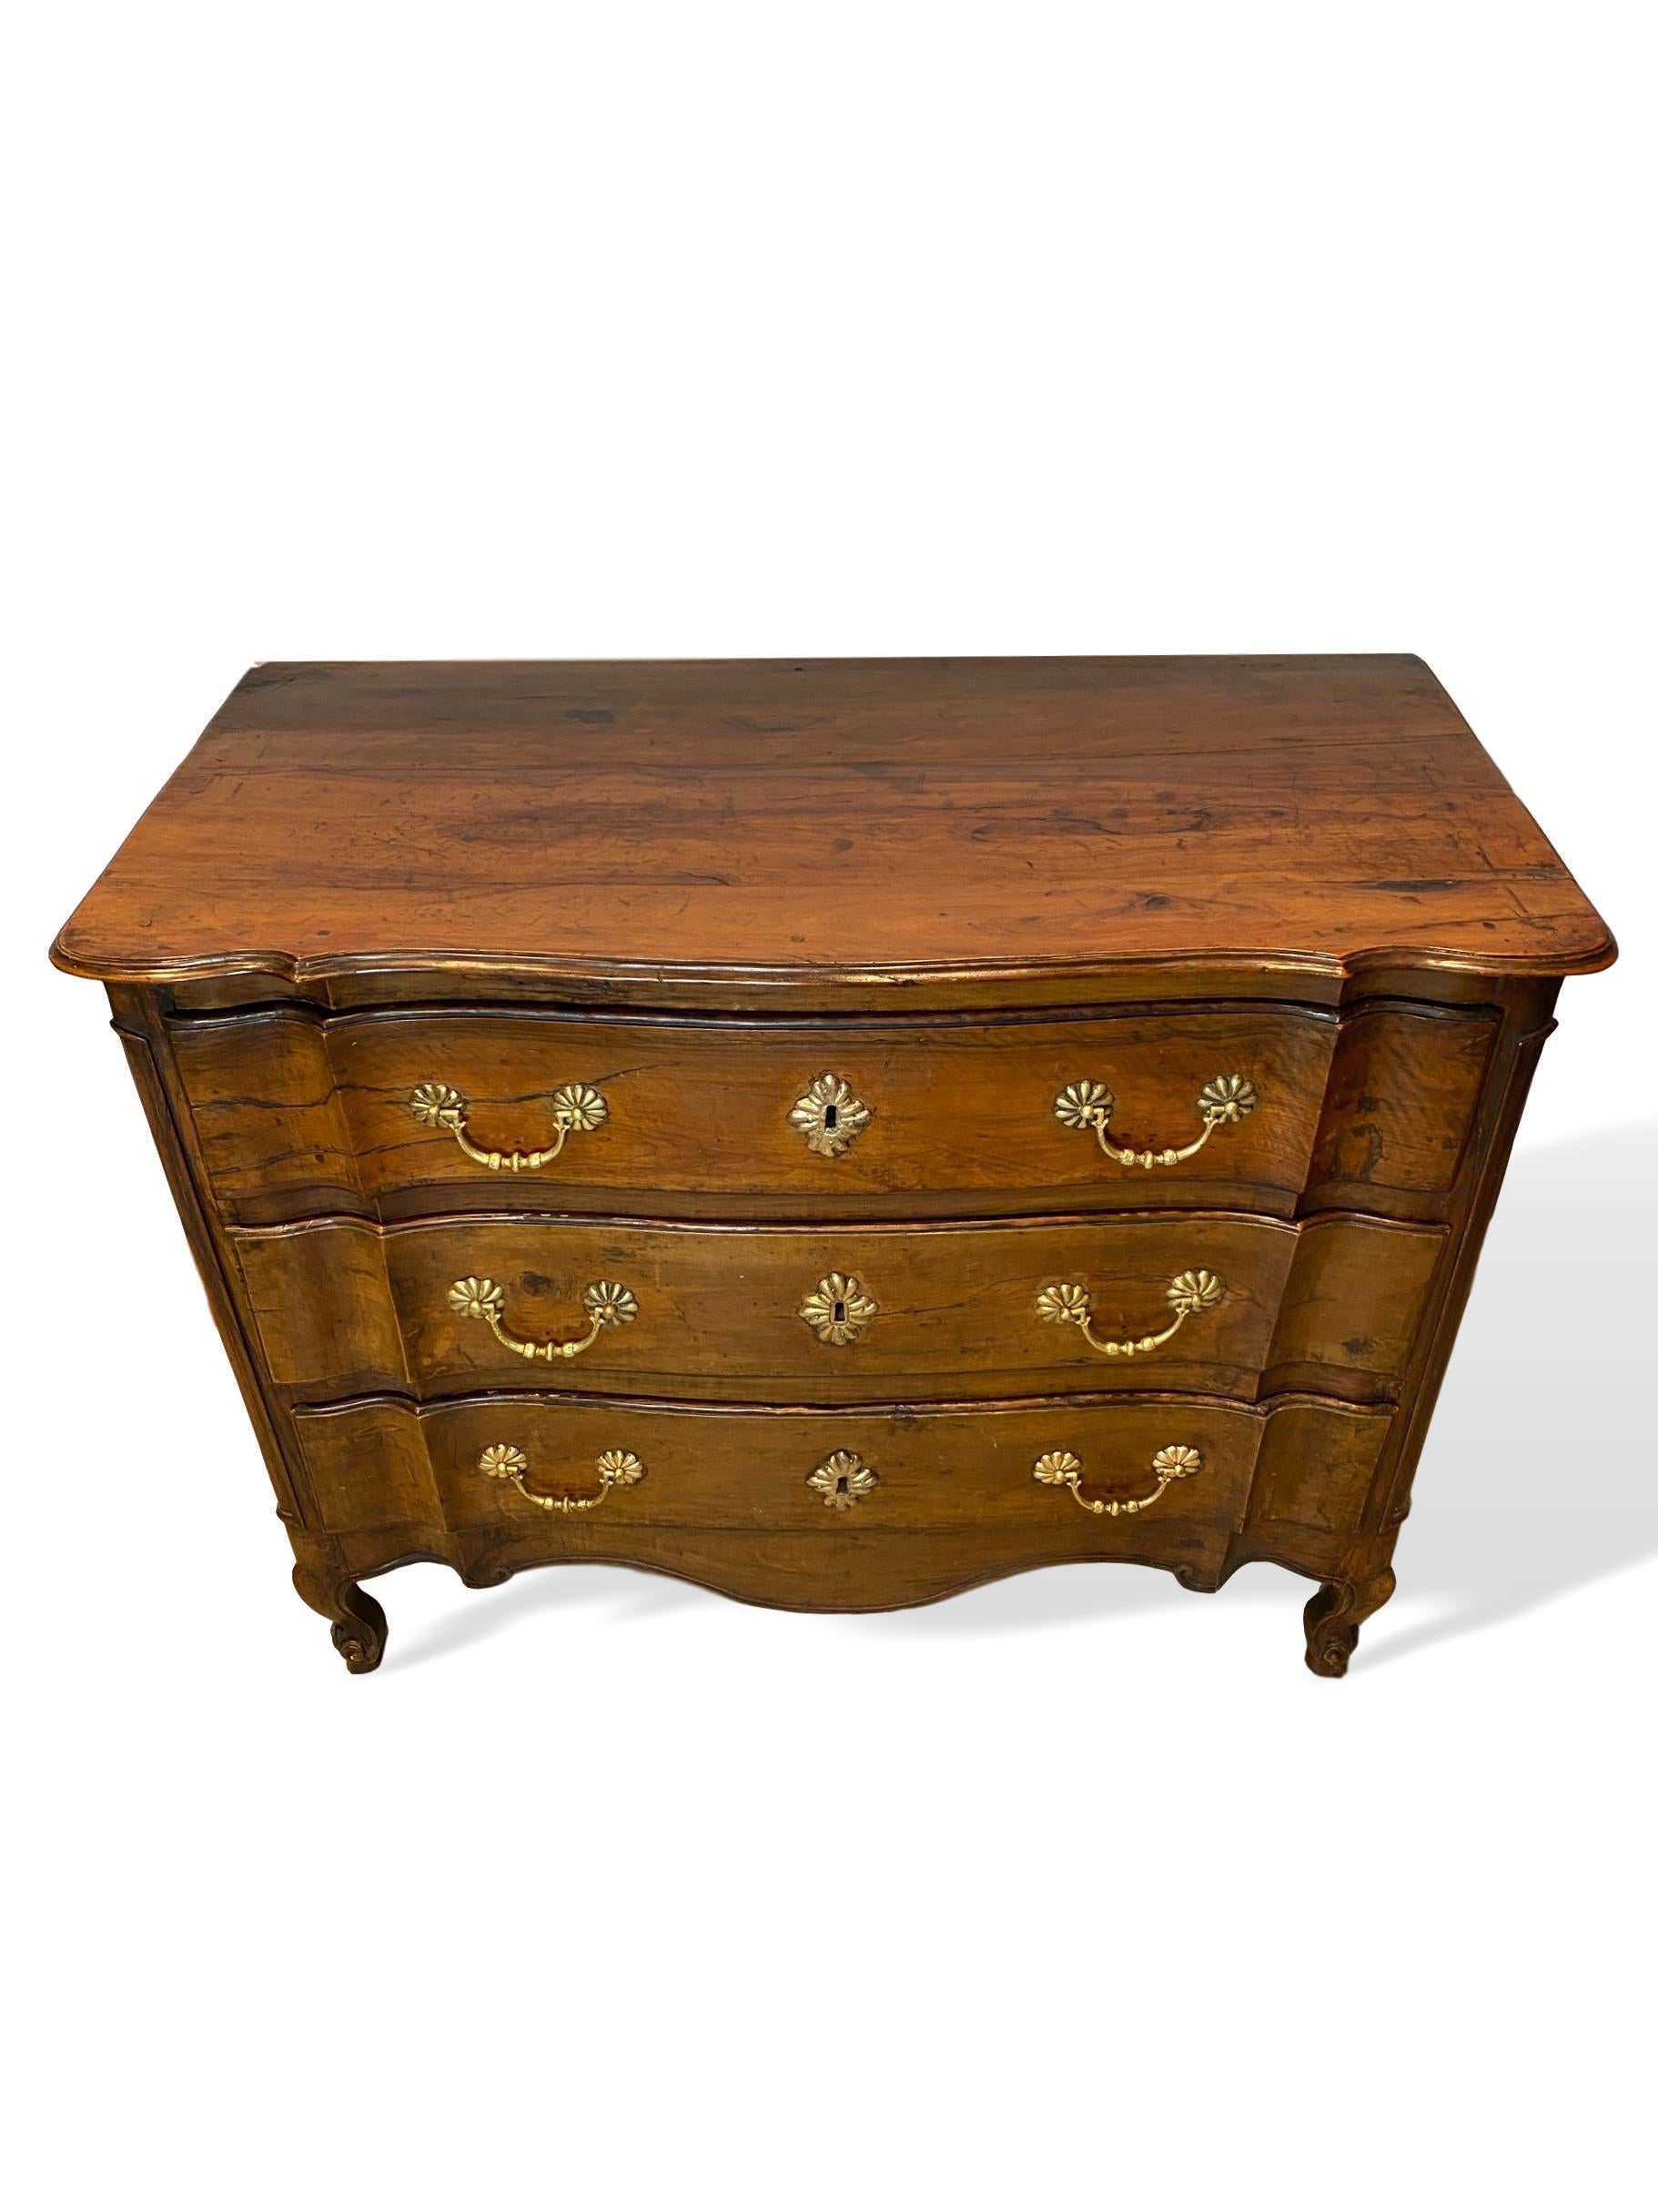 18th century Louis XV carved cherry commode, French, circa 1750, the rectangular top with molded edge and shaped conforming slight serpentine front edge, three shaped and lipped long drawers, relief carved paneled stiles, molded and paneled sides,